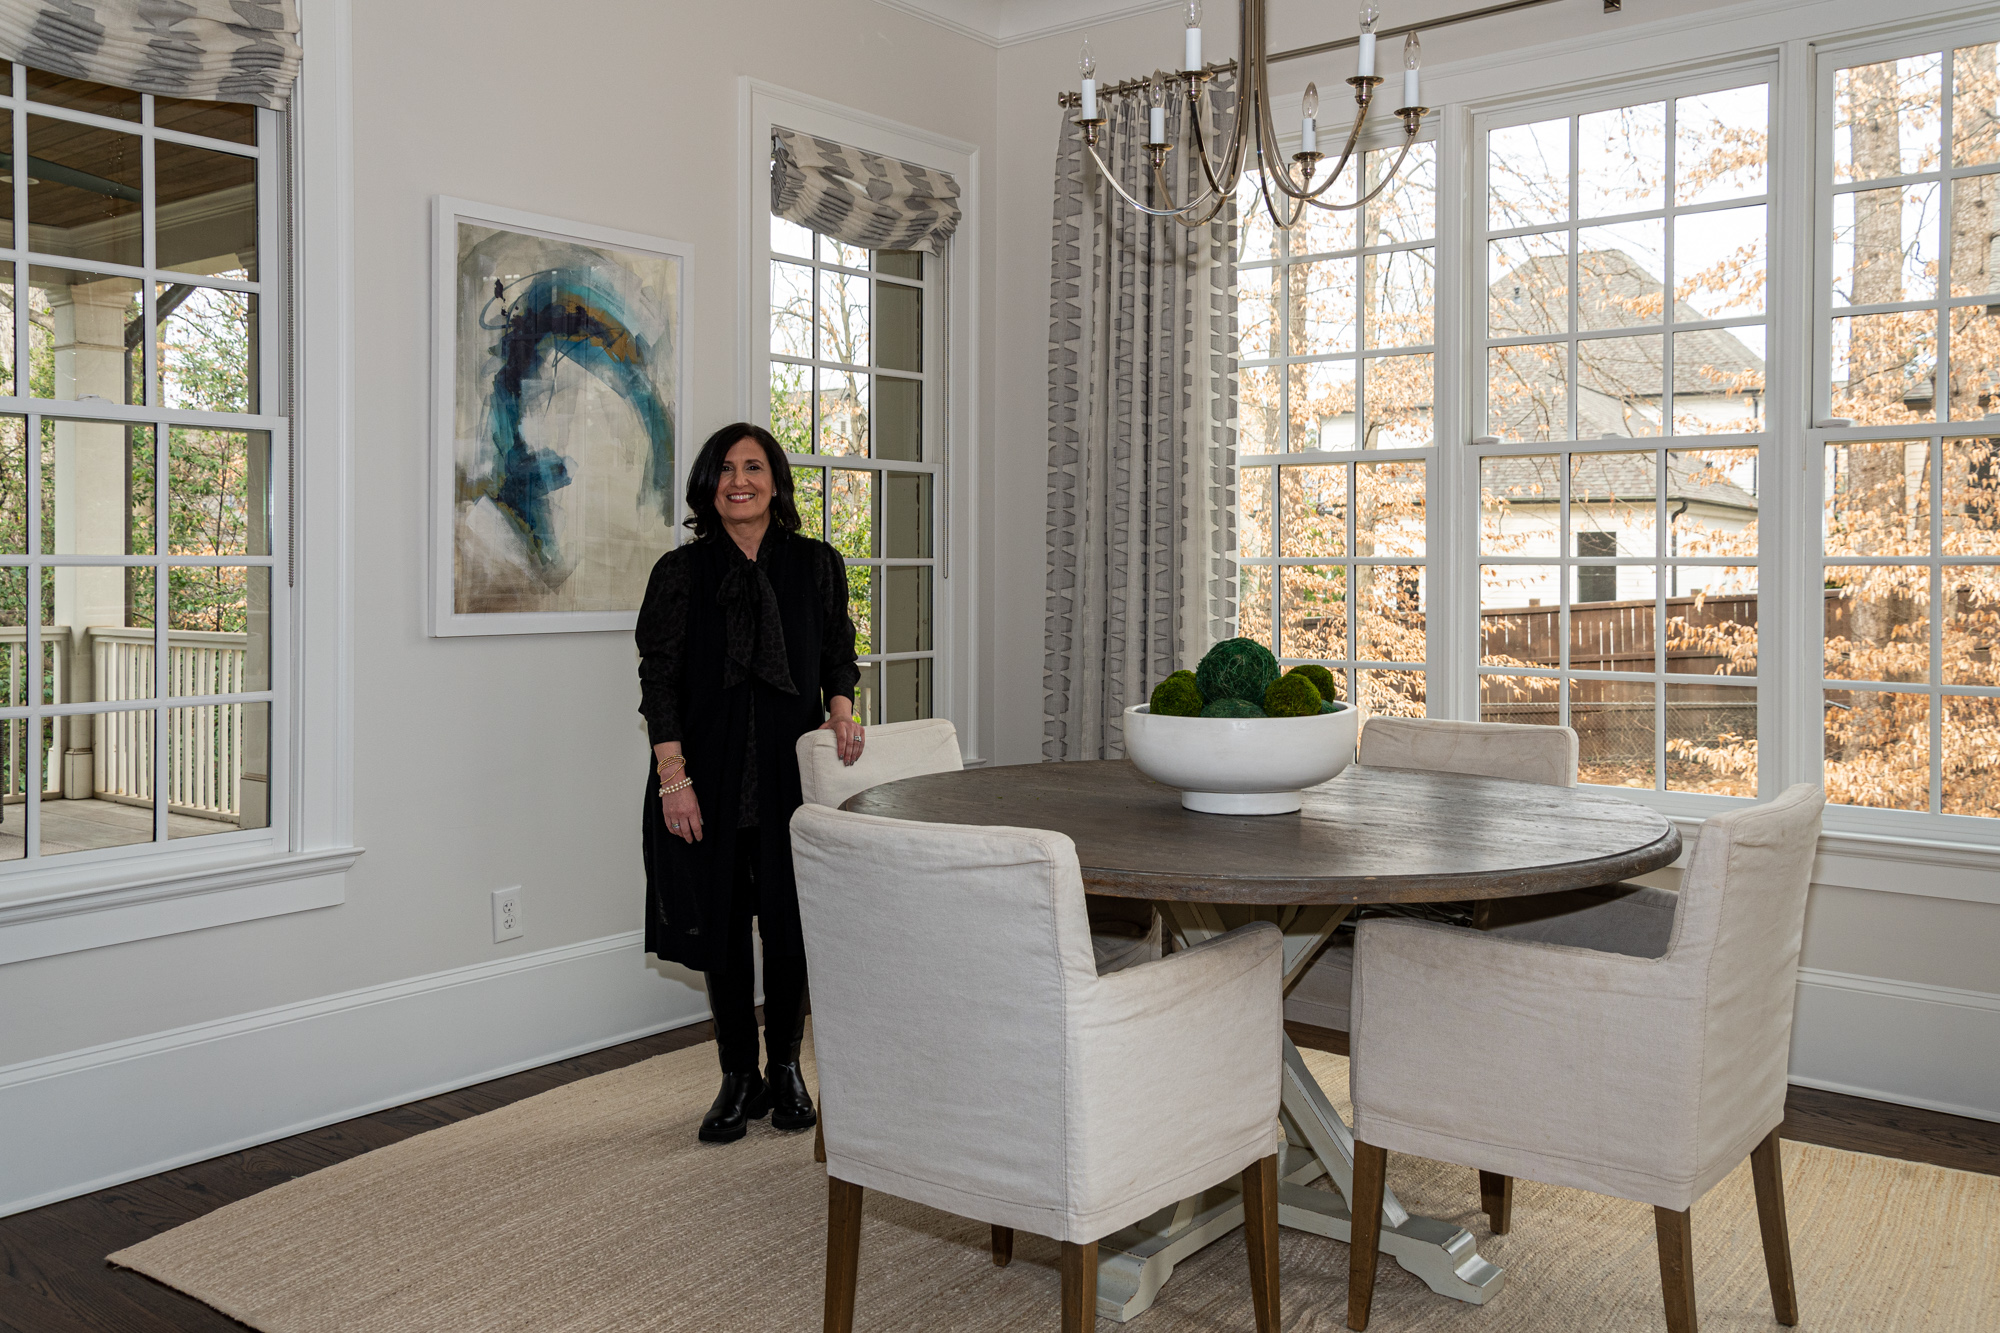 A Canadian native, Lisa Glazman (LMG Designs), works alongside high-end residential builders, architects and suppliers. Shown here in the Pastner kitchen nook overlooking the kids’ trampoline area.